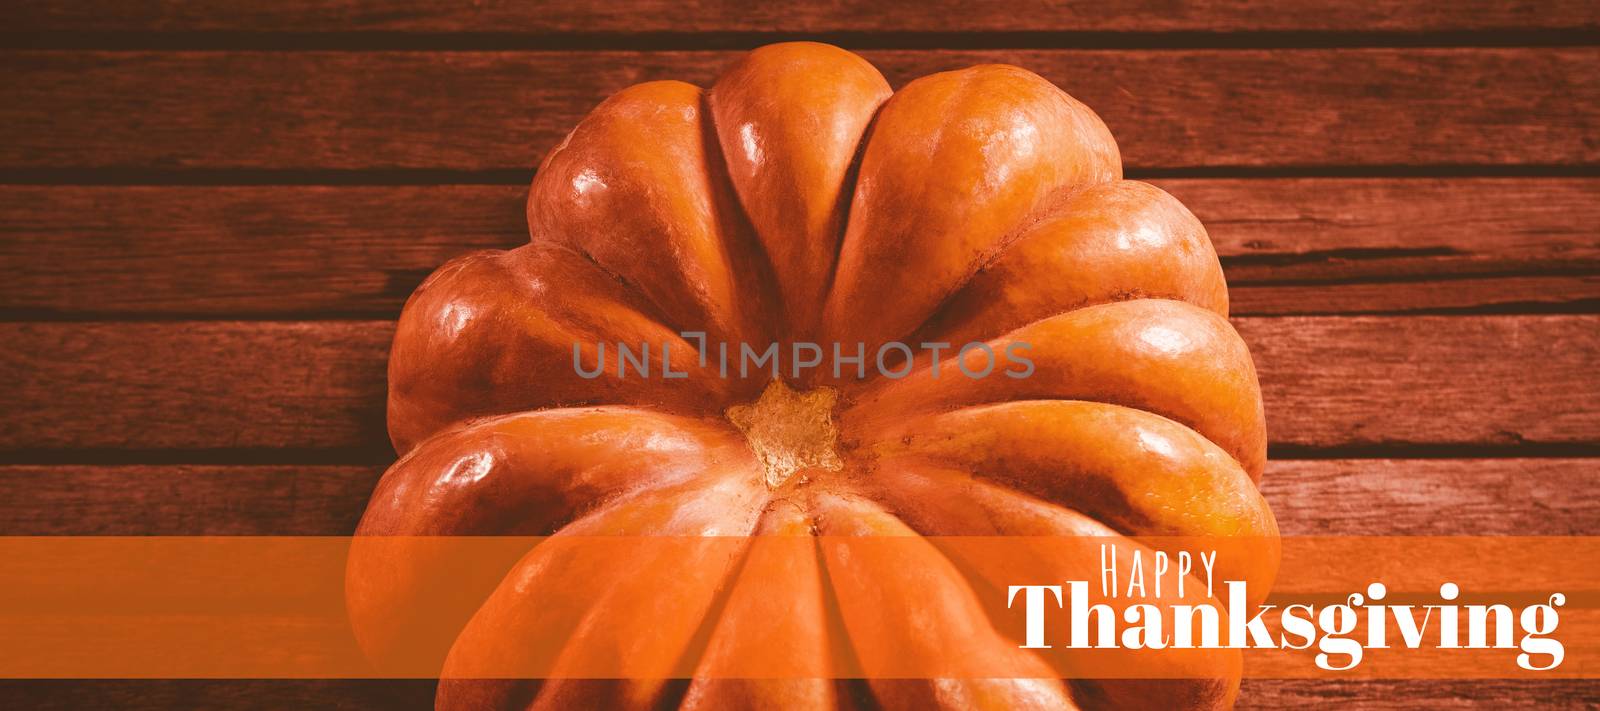 Digitally generated image of happy thanksgiving text against view of pumpkin on wooden table during halloween